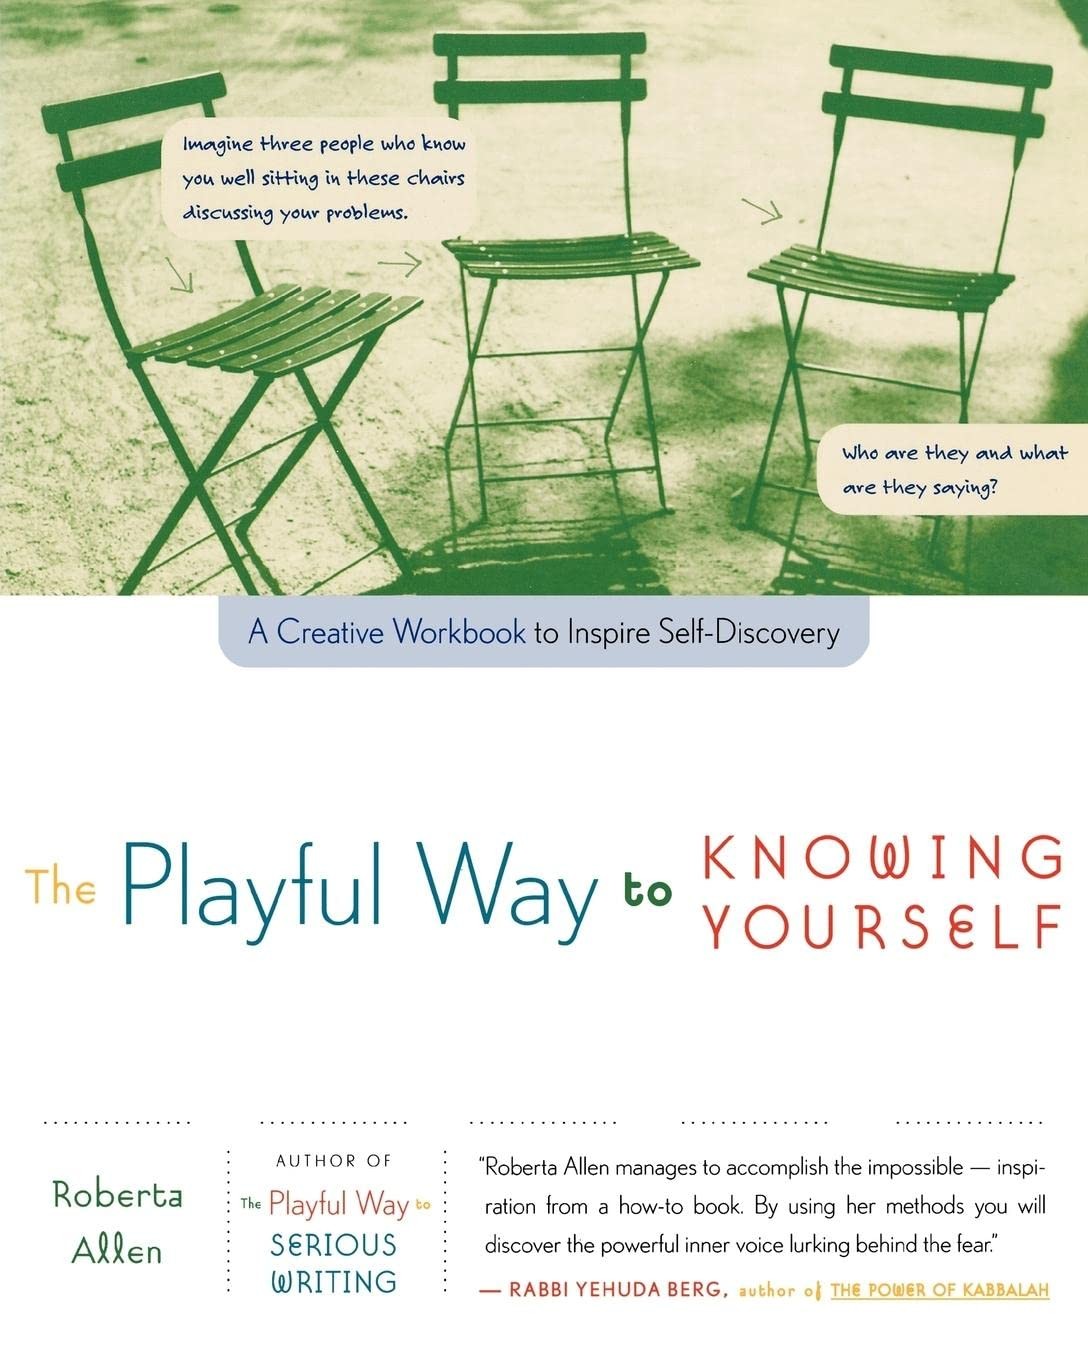 The Playful Way to Knowing Yourself: A Creative Workbook to Inspire Self-Discovery